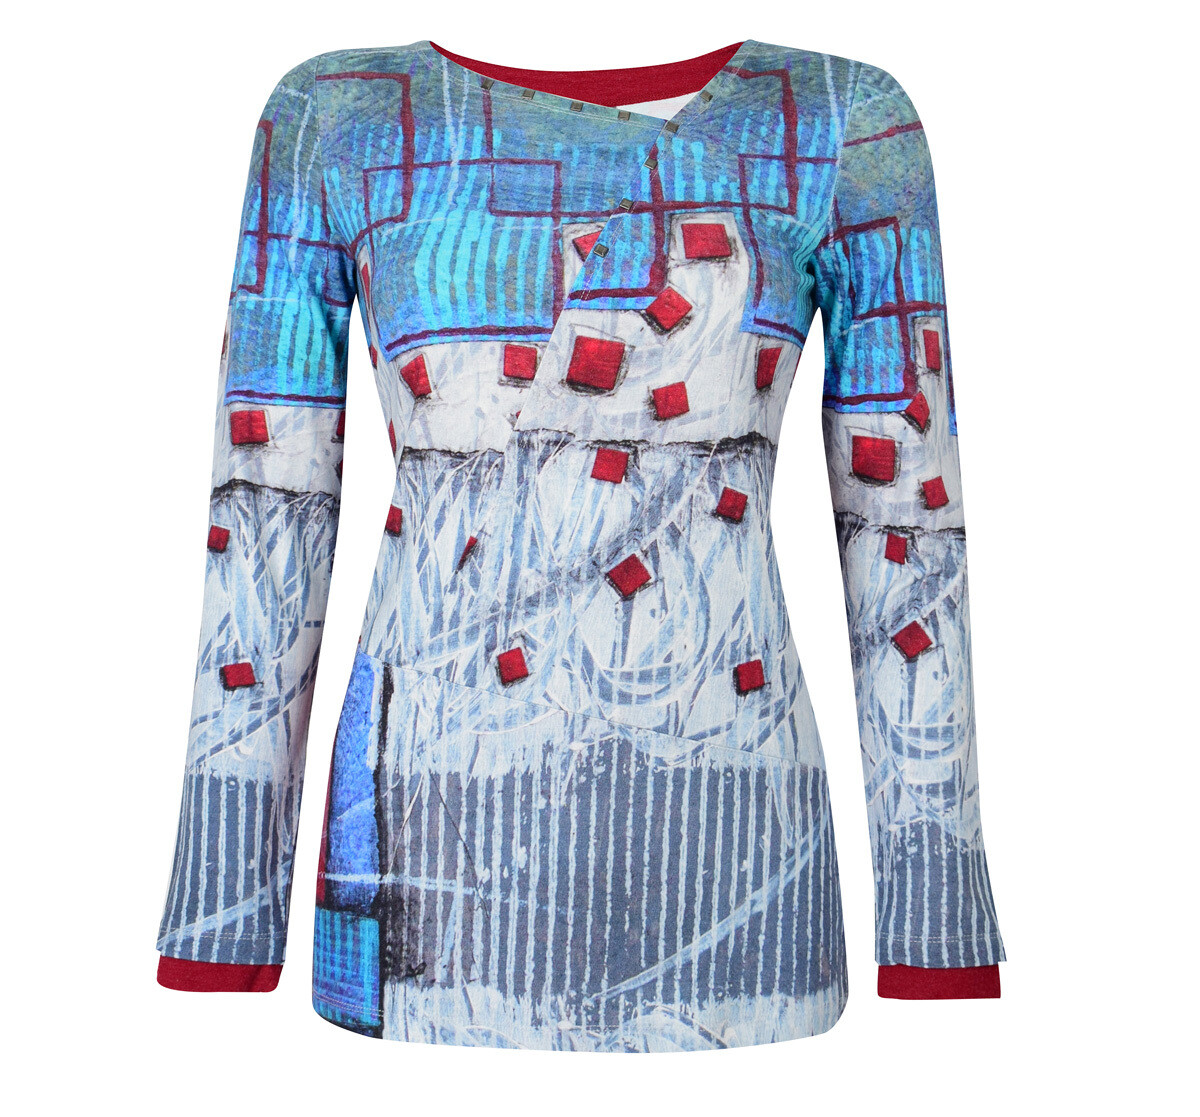 Simply Art Dolcezza: Asymmetrical Spiritually Square Uneven Abstract Art Tunic SOLD OUT